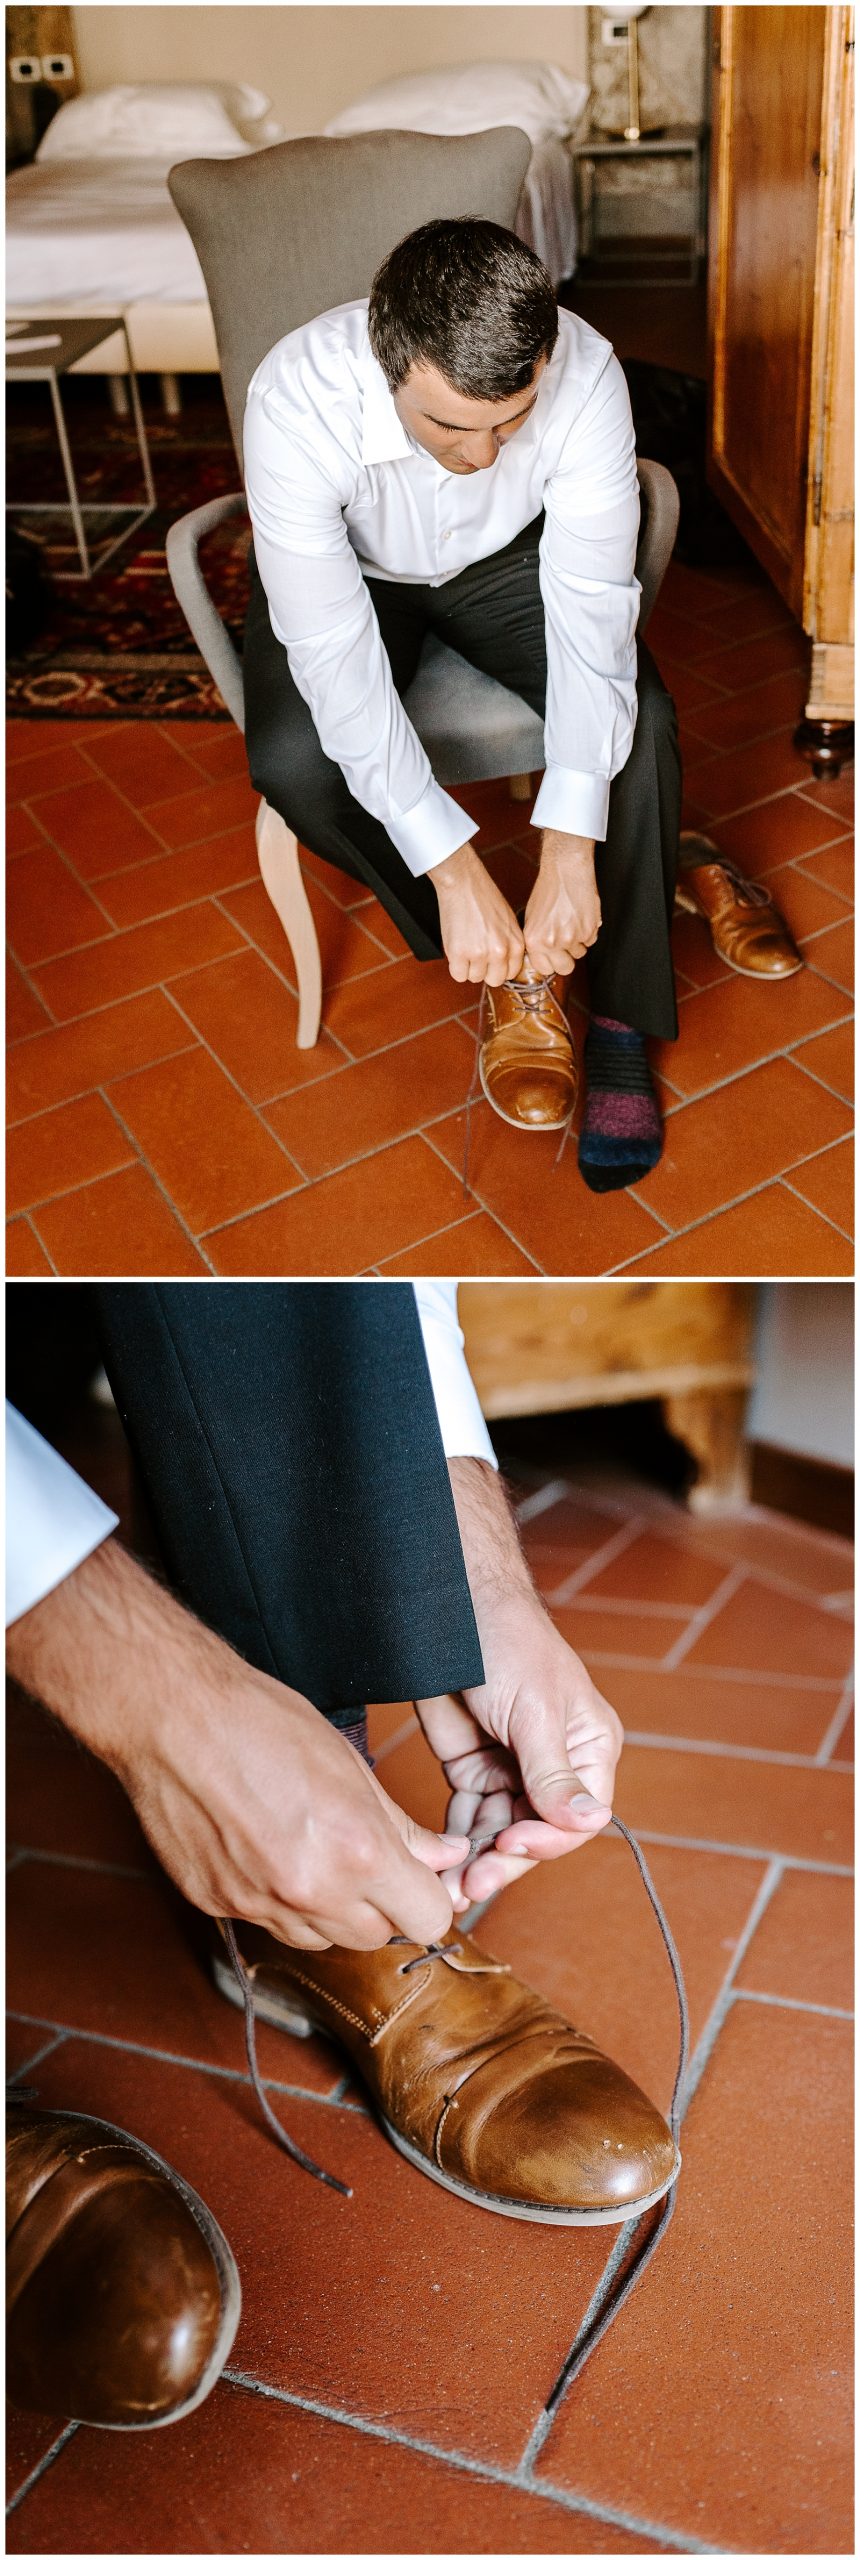 tuscany elopement in italy